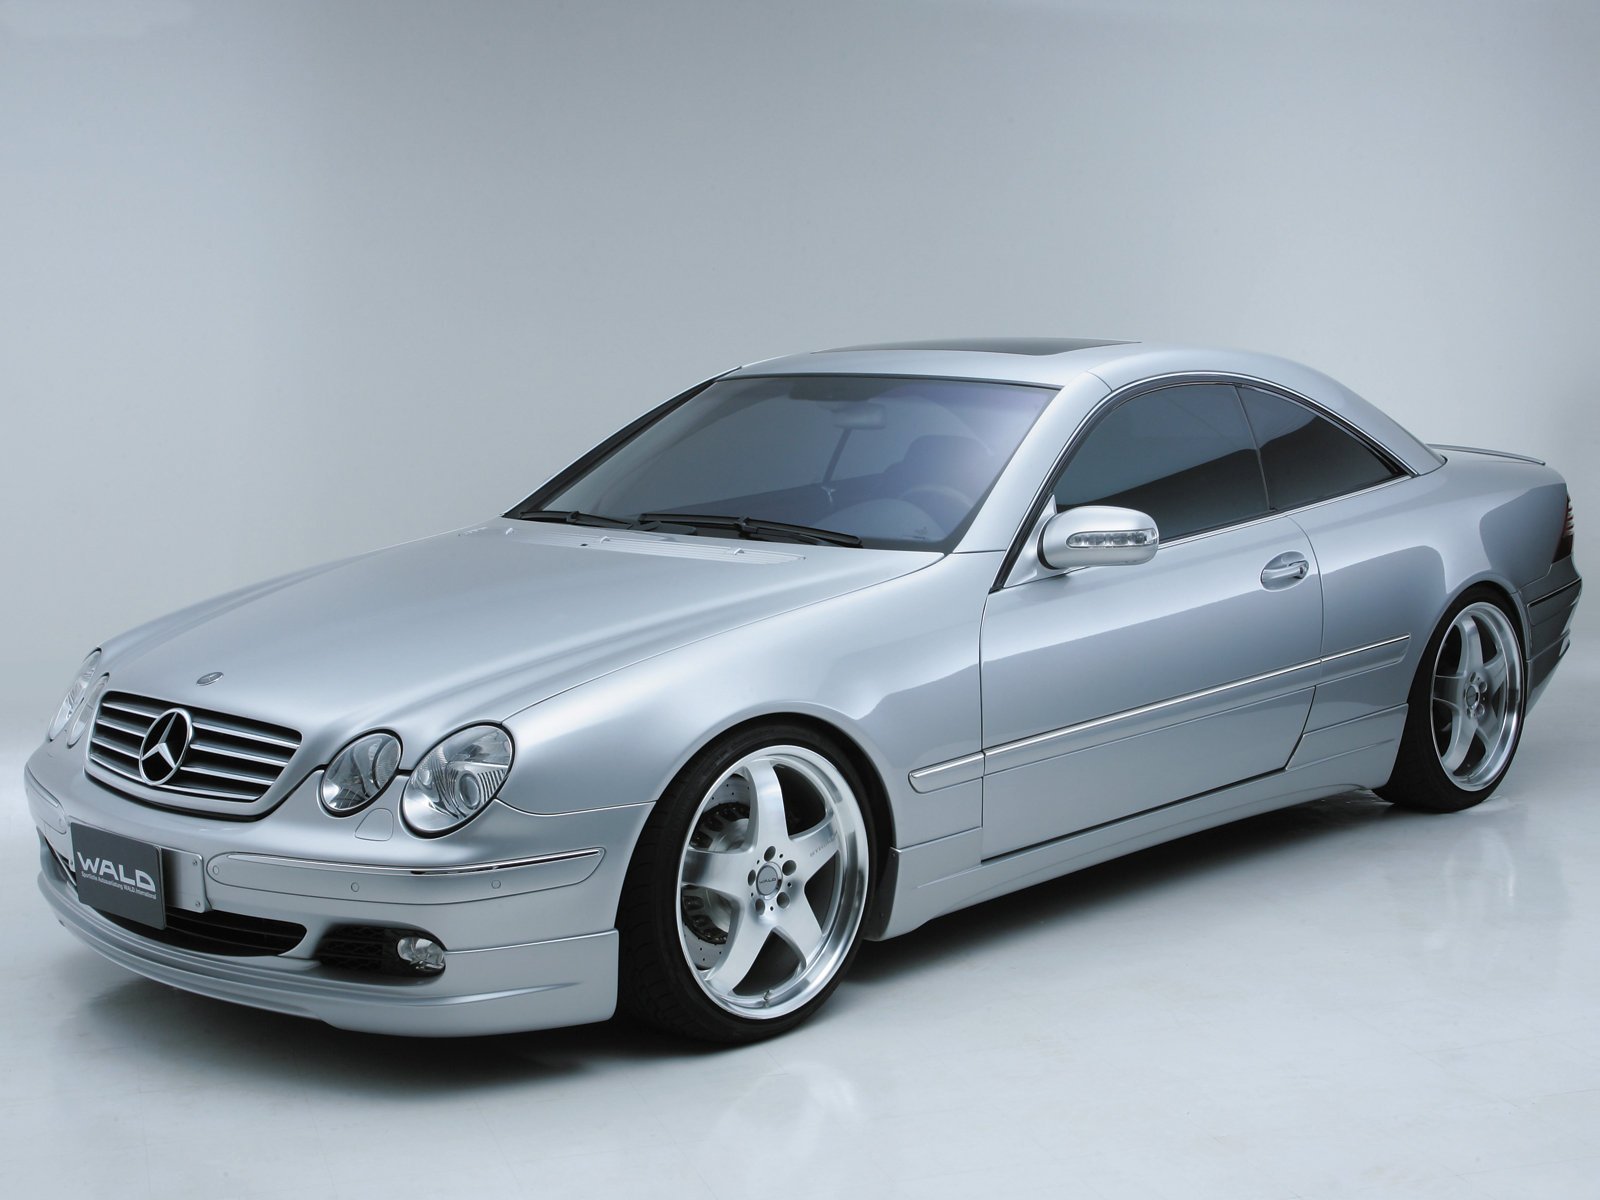 wald, Mercedes, Benz, Cl, Cars, Coupe, Modified Wallpaper